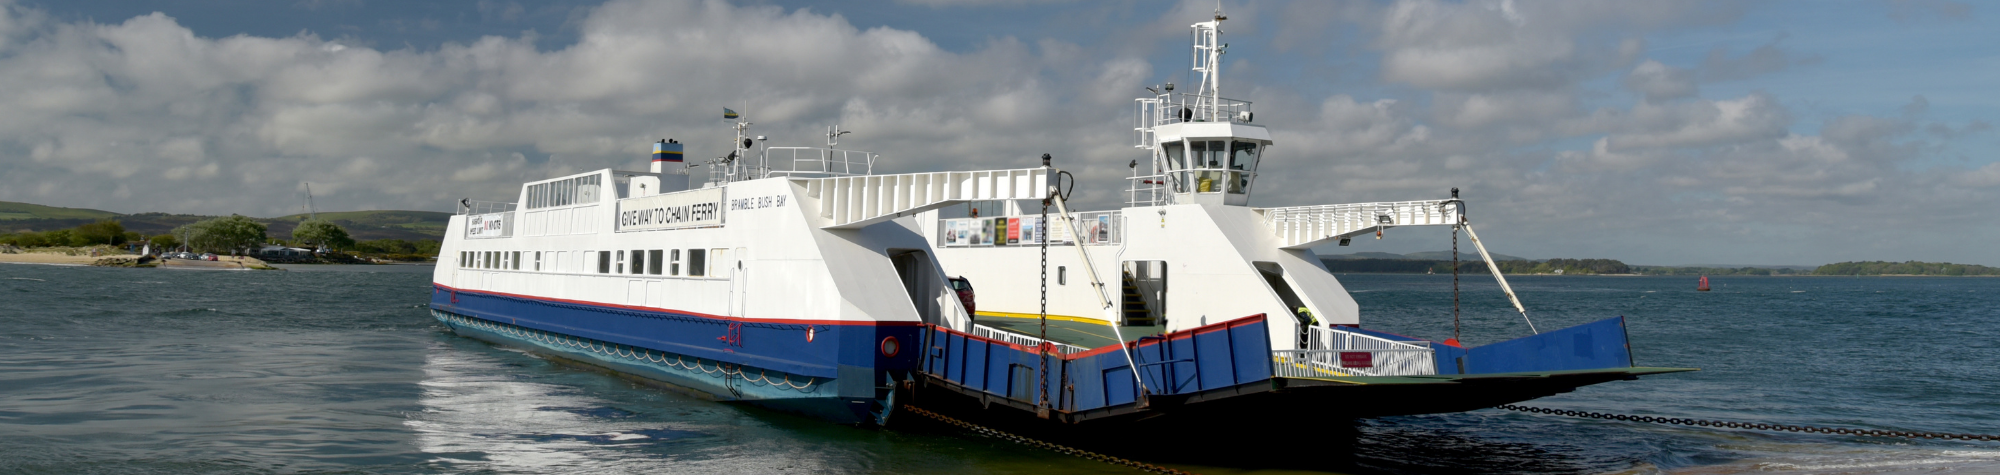 Jetty Malfunction Damages Poole Ferry